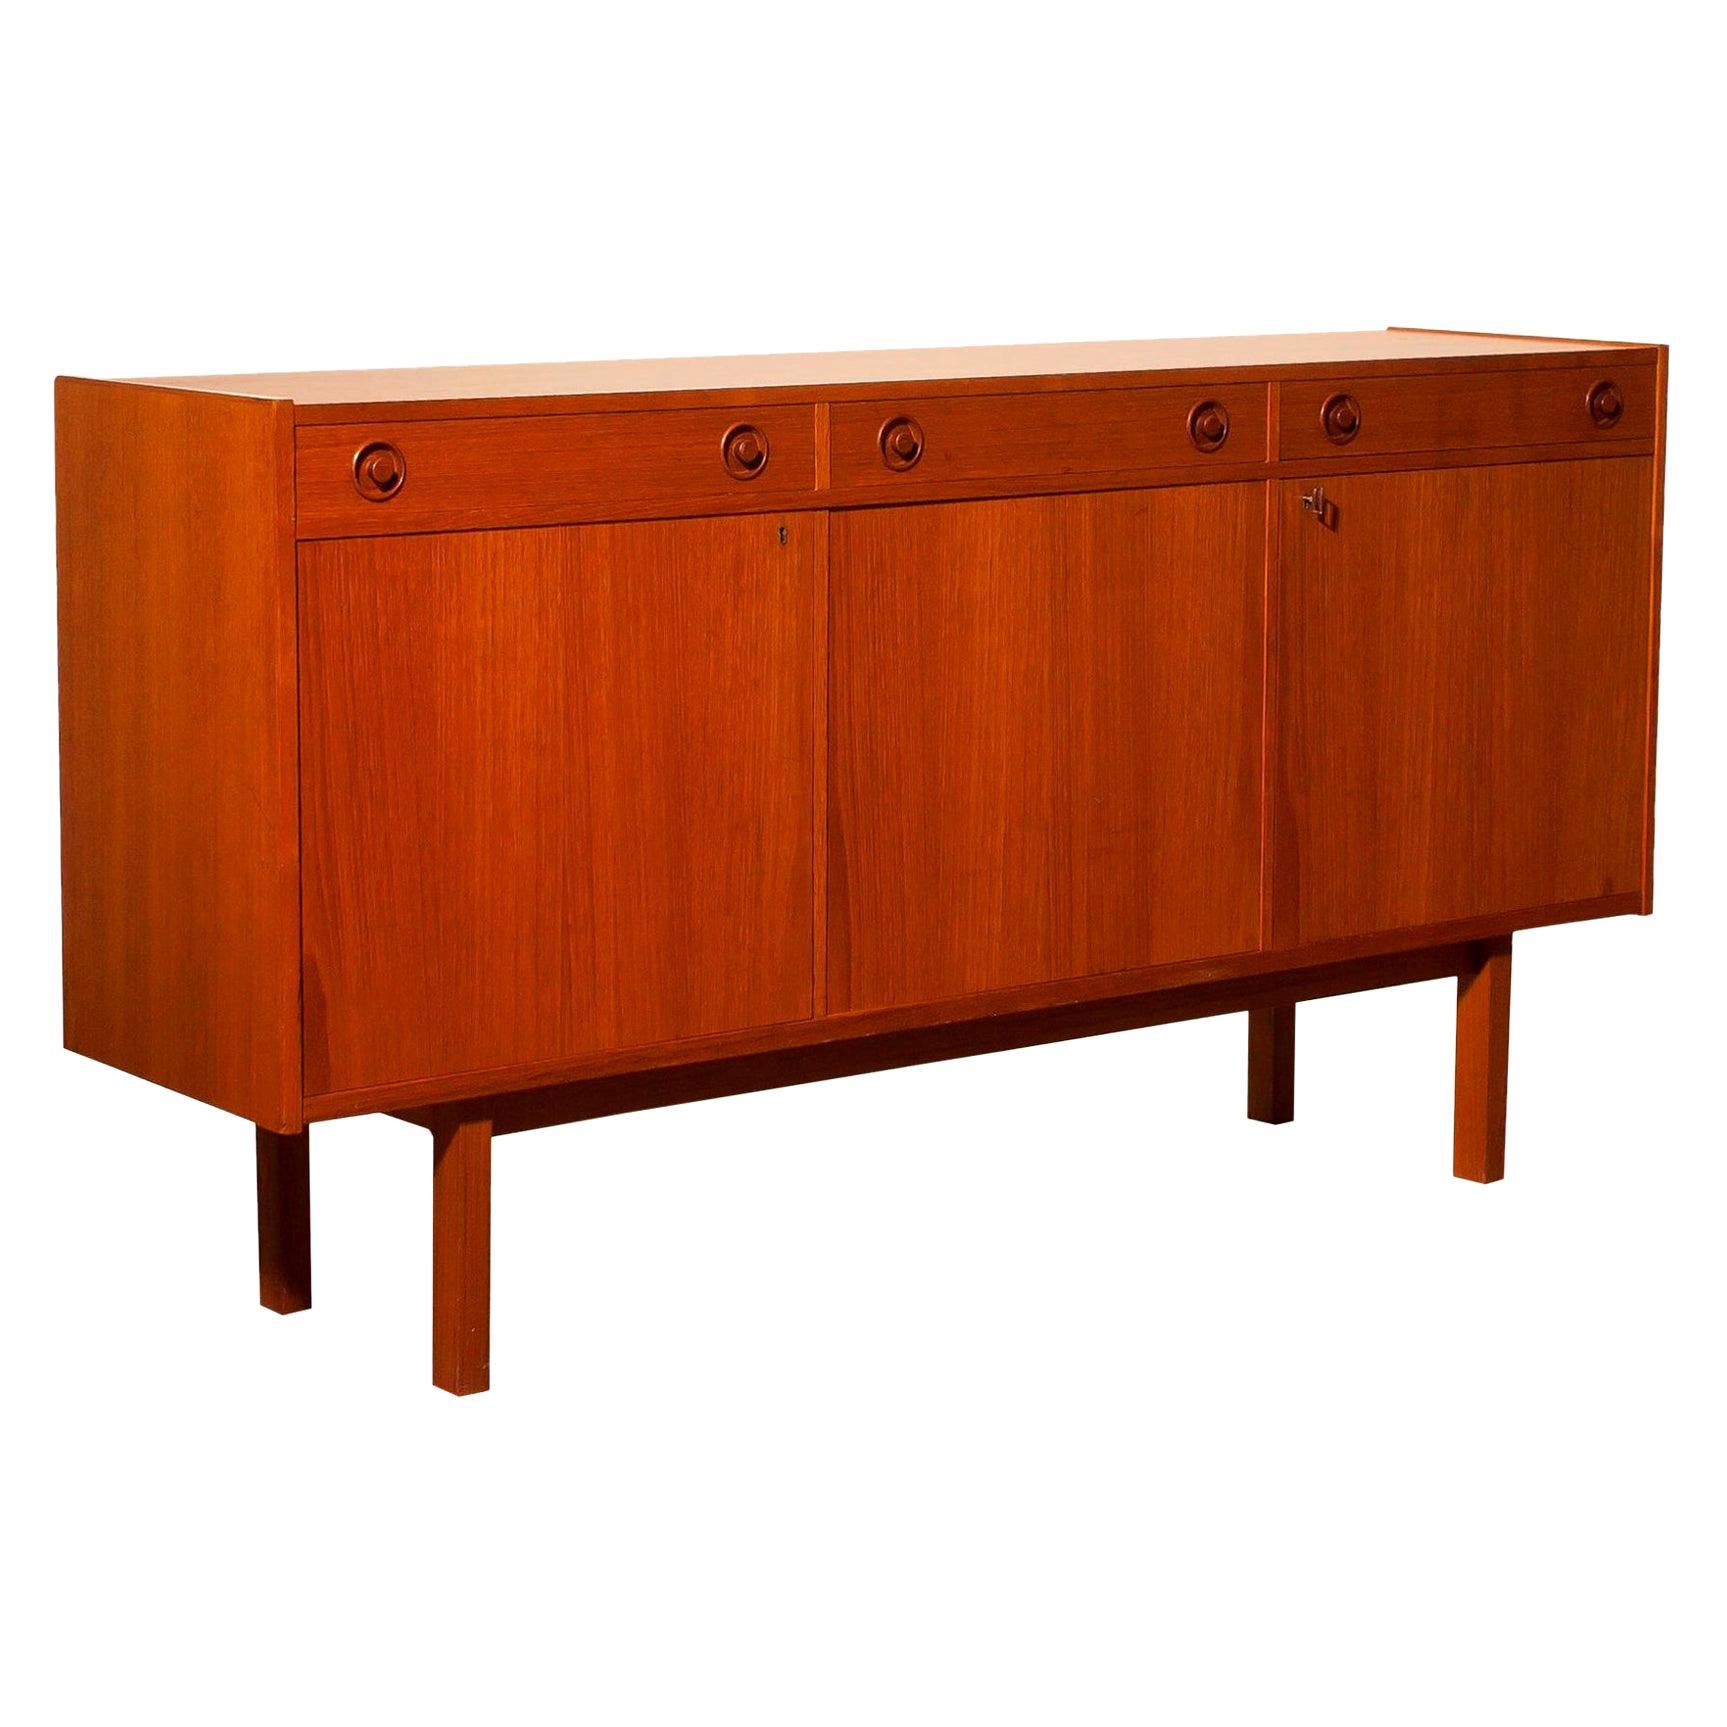 Beautiful sideboard produced by Brexo Möbler, Sweden.
This cabinet is made of teak and has three drawers and three doors.
It is in very nice condition with just a little spot on the top.
Key included.
Period 1950s.
Dimensions: H 90 cm, W 170